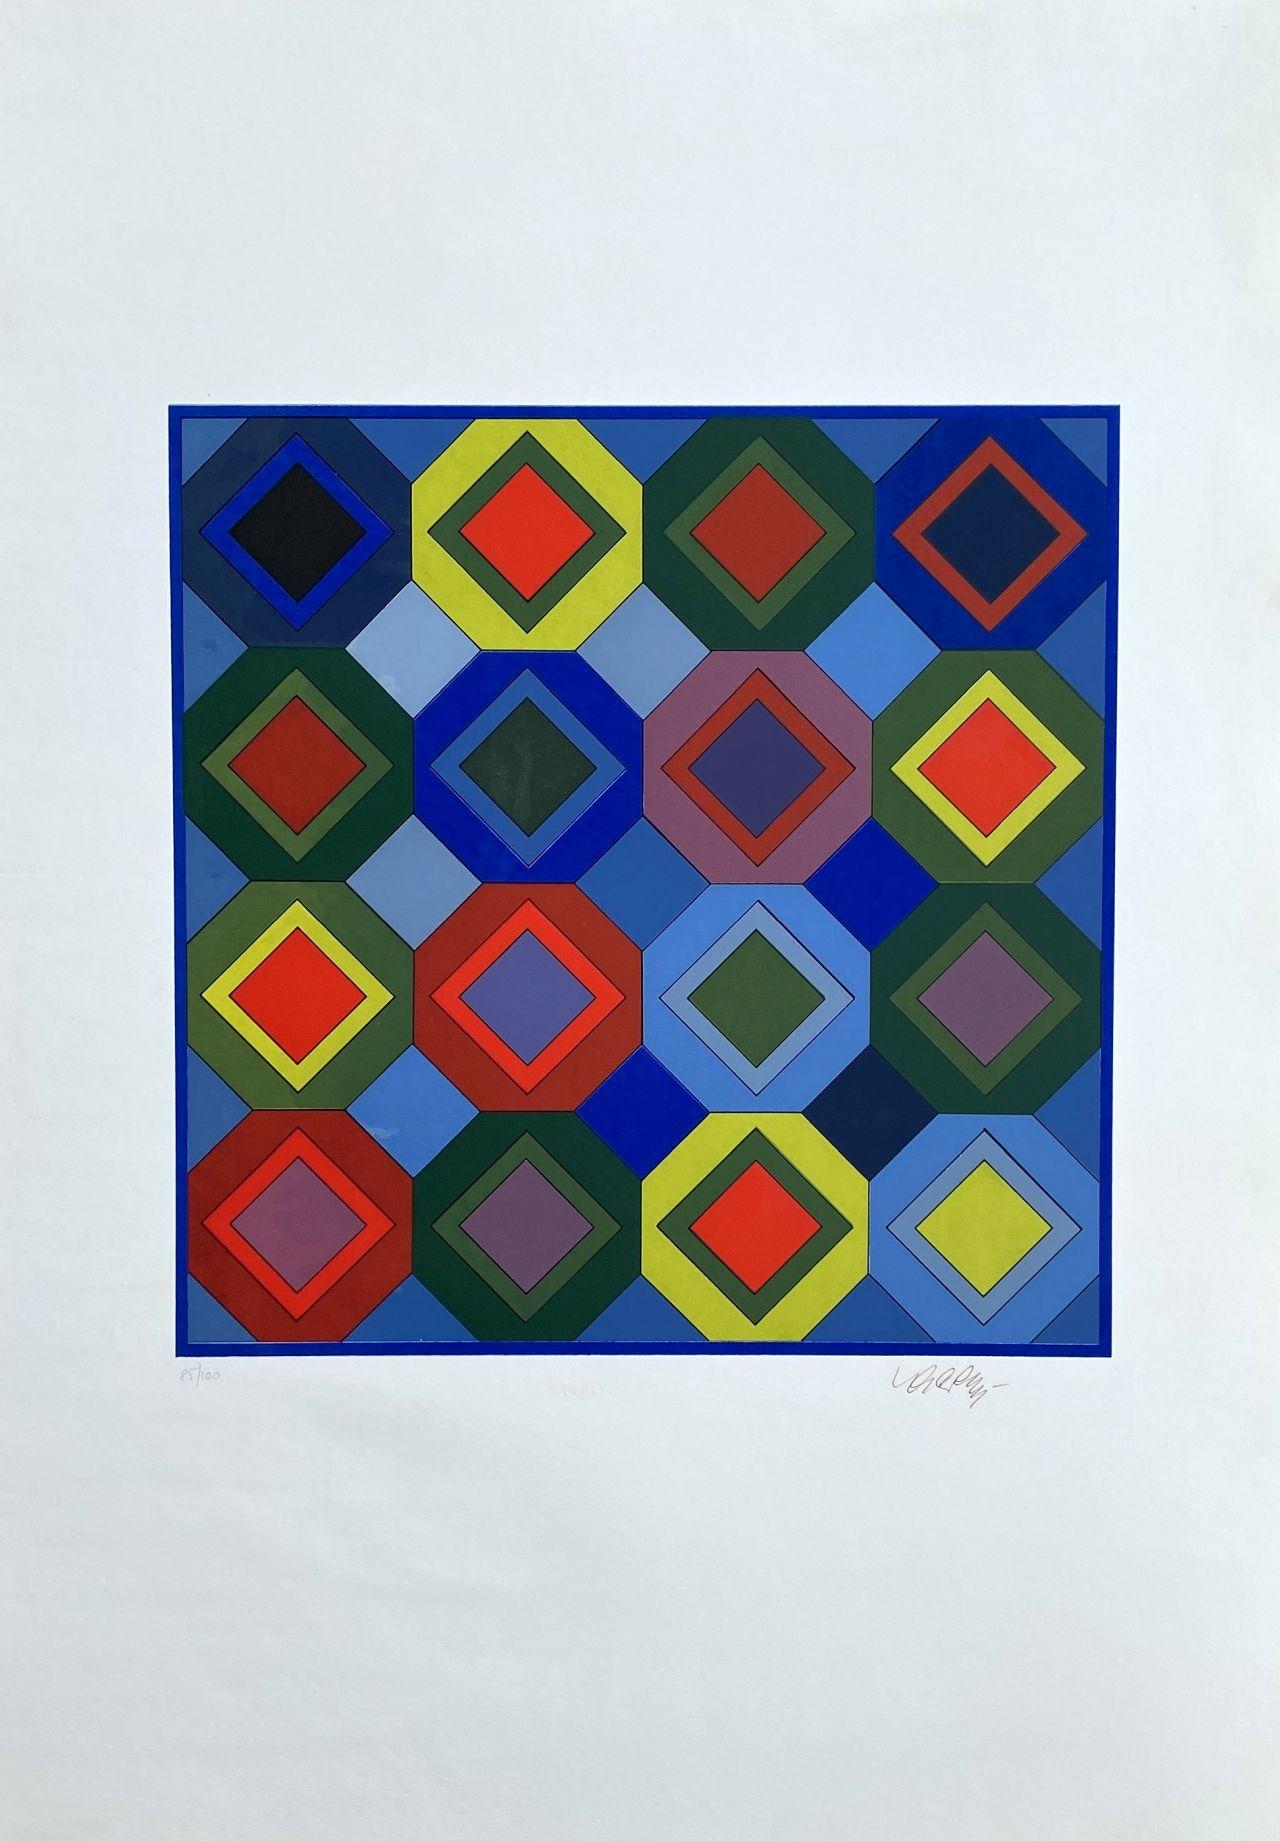 Victor Vasarely Interior Print - Cinetic Composition - Screen Print Hand Signed and Numbered - 100 copies